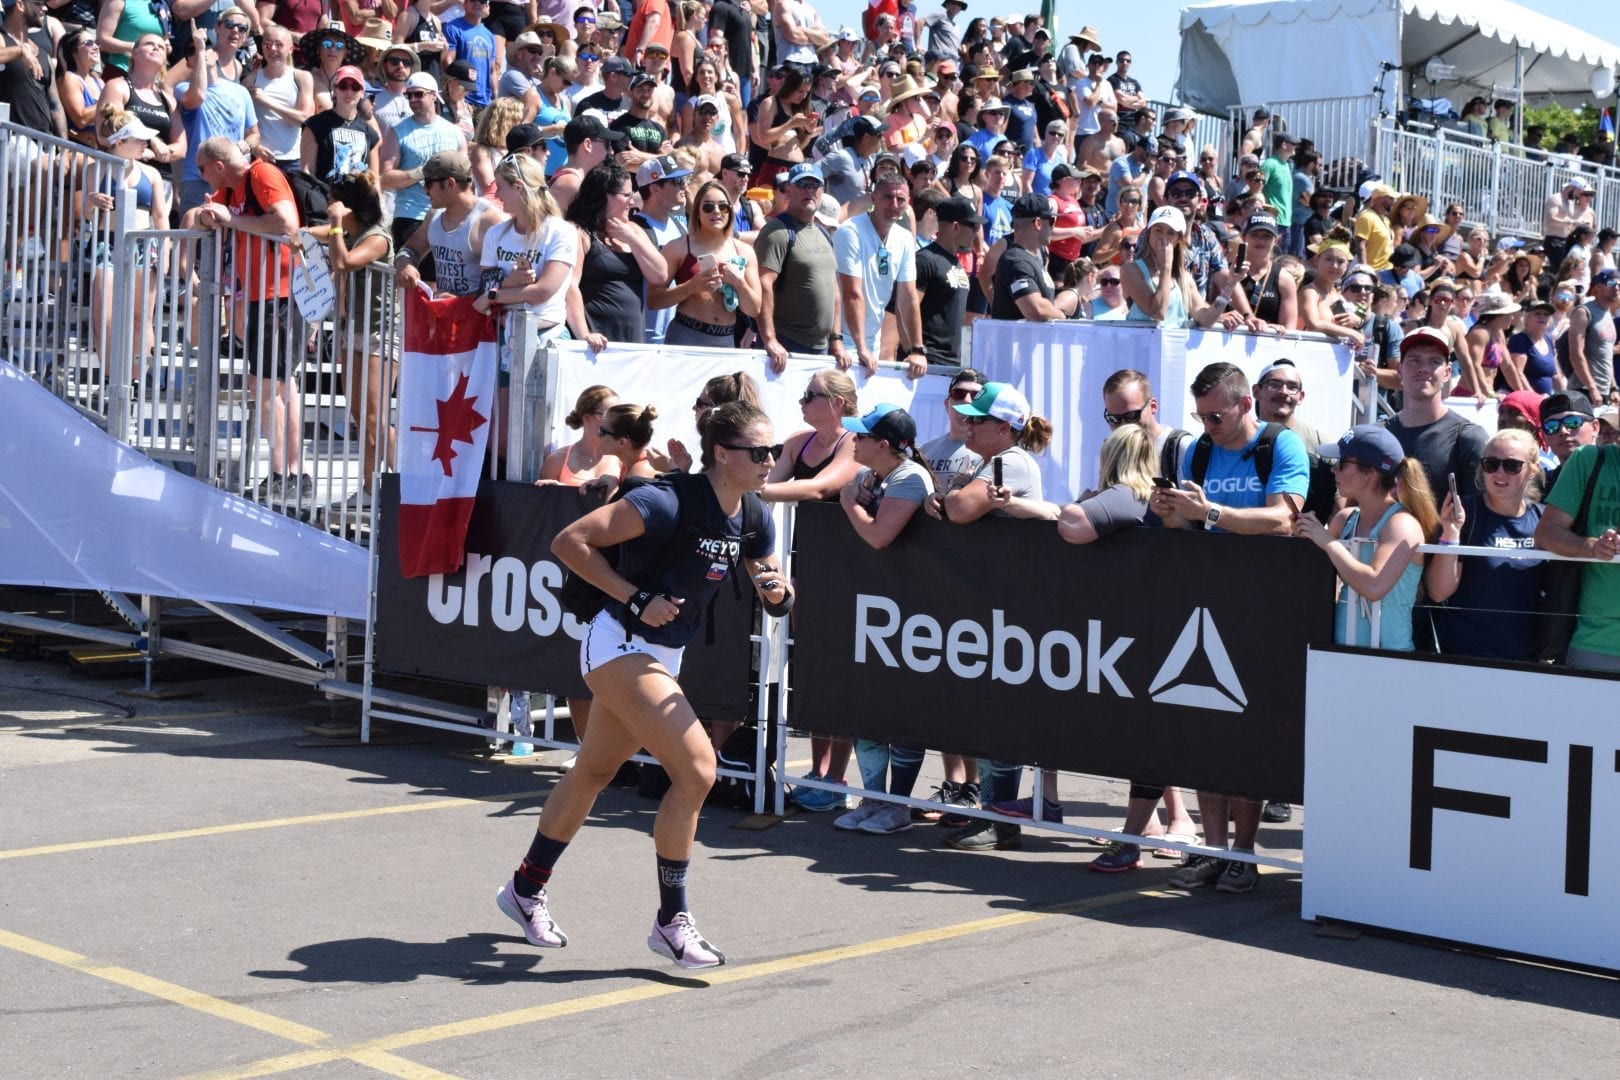 Karin Freyova completes the Ruck Run event at the 2019 CrossFit Games